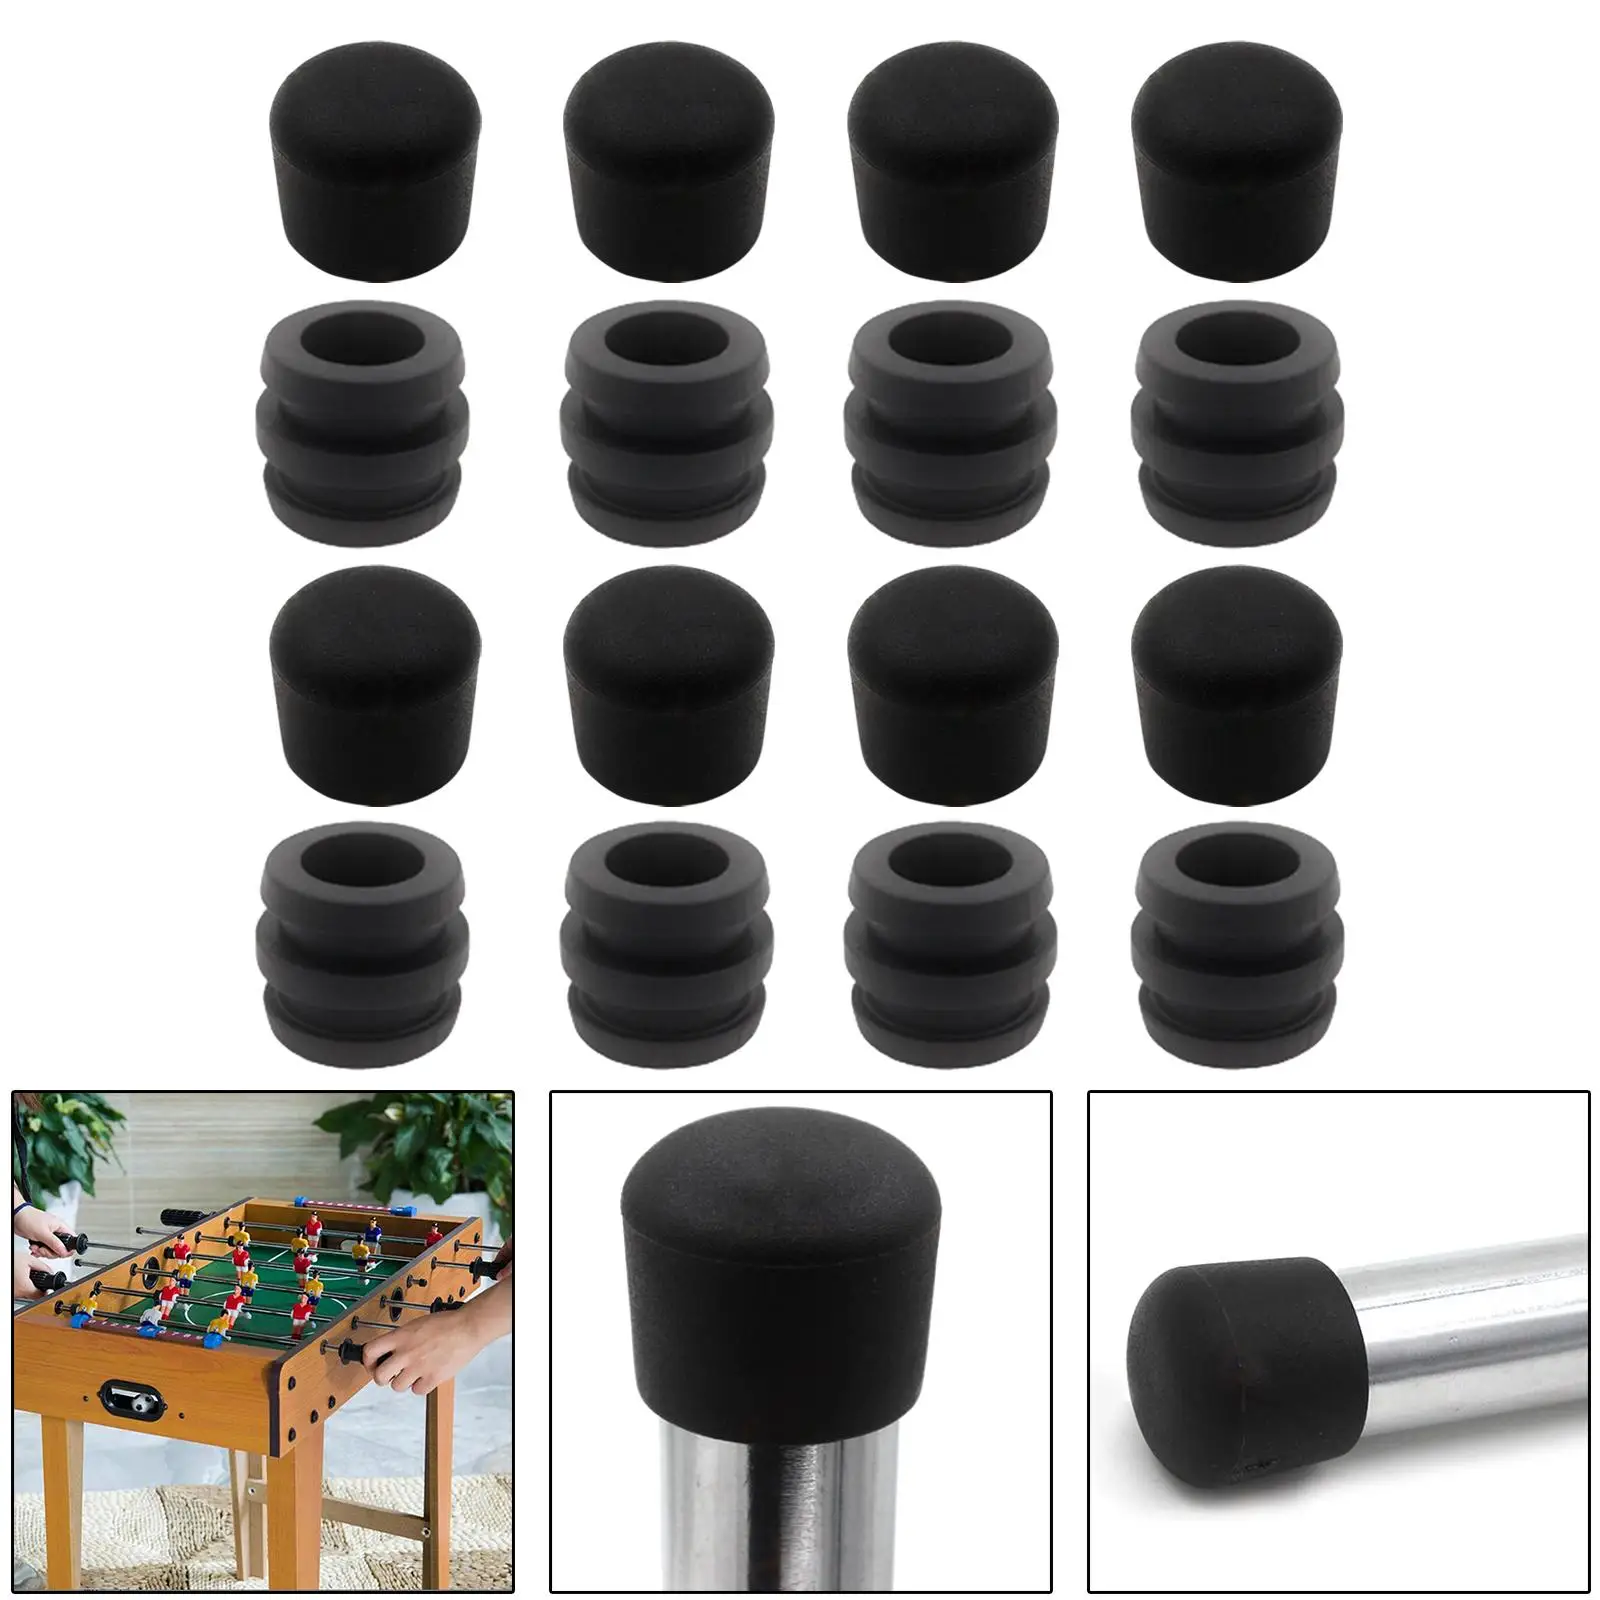 Rod Bumpers End Caps Table Soccer Durable Universal Plastic Parts Standard Foosball Tables Fussball Rod Bumper Buffer